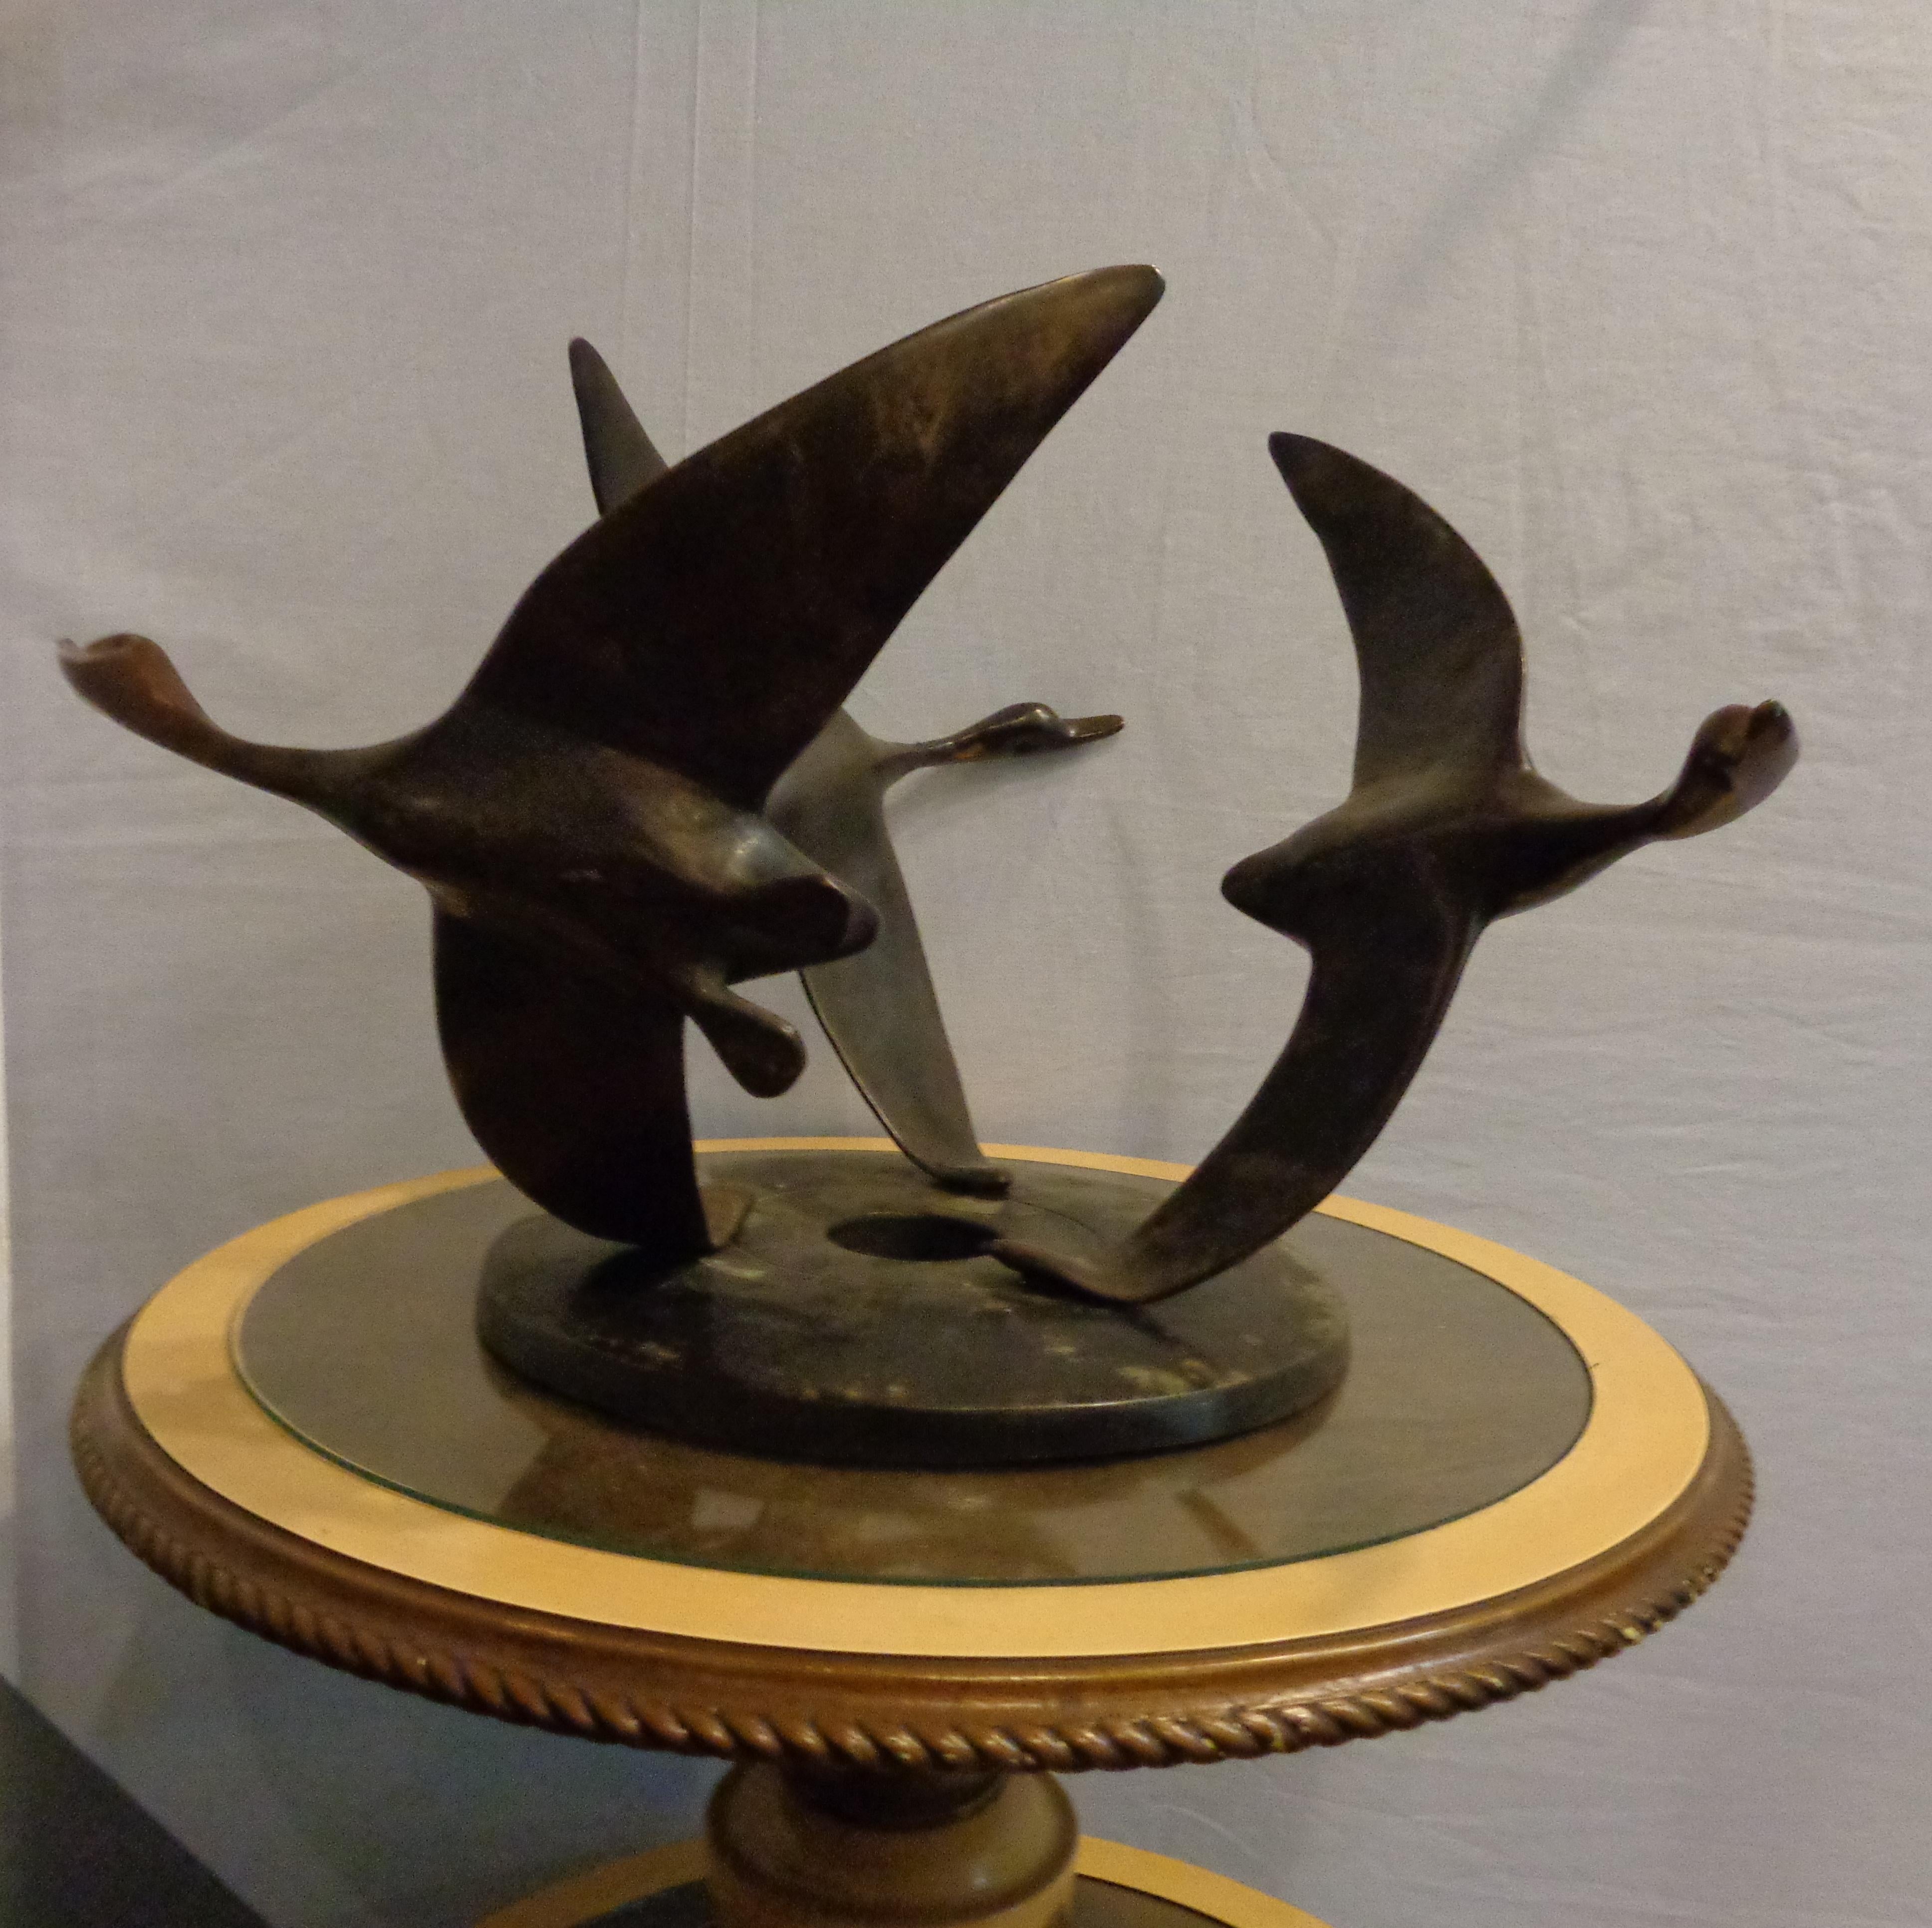 An Art Deco bronze sculpture of flying geese on an adjustable base. Finely cast decorative sculpture of large geese which are movable on a circular disk tray.